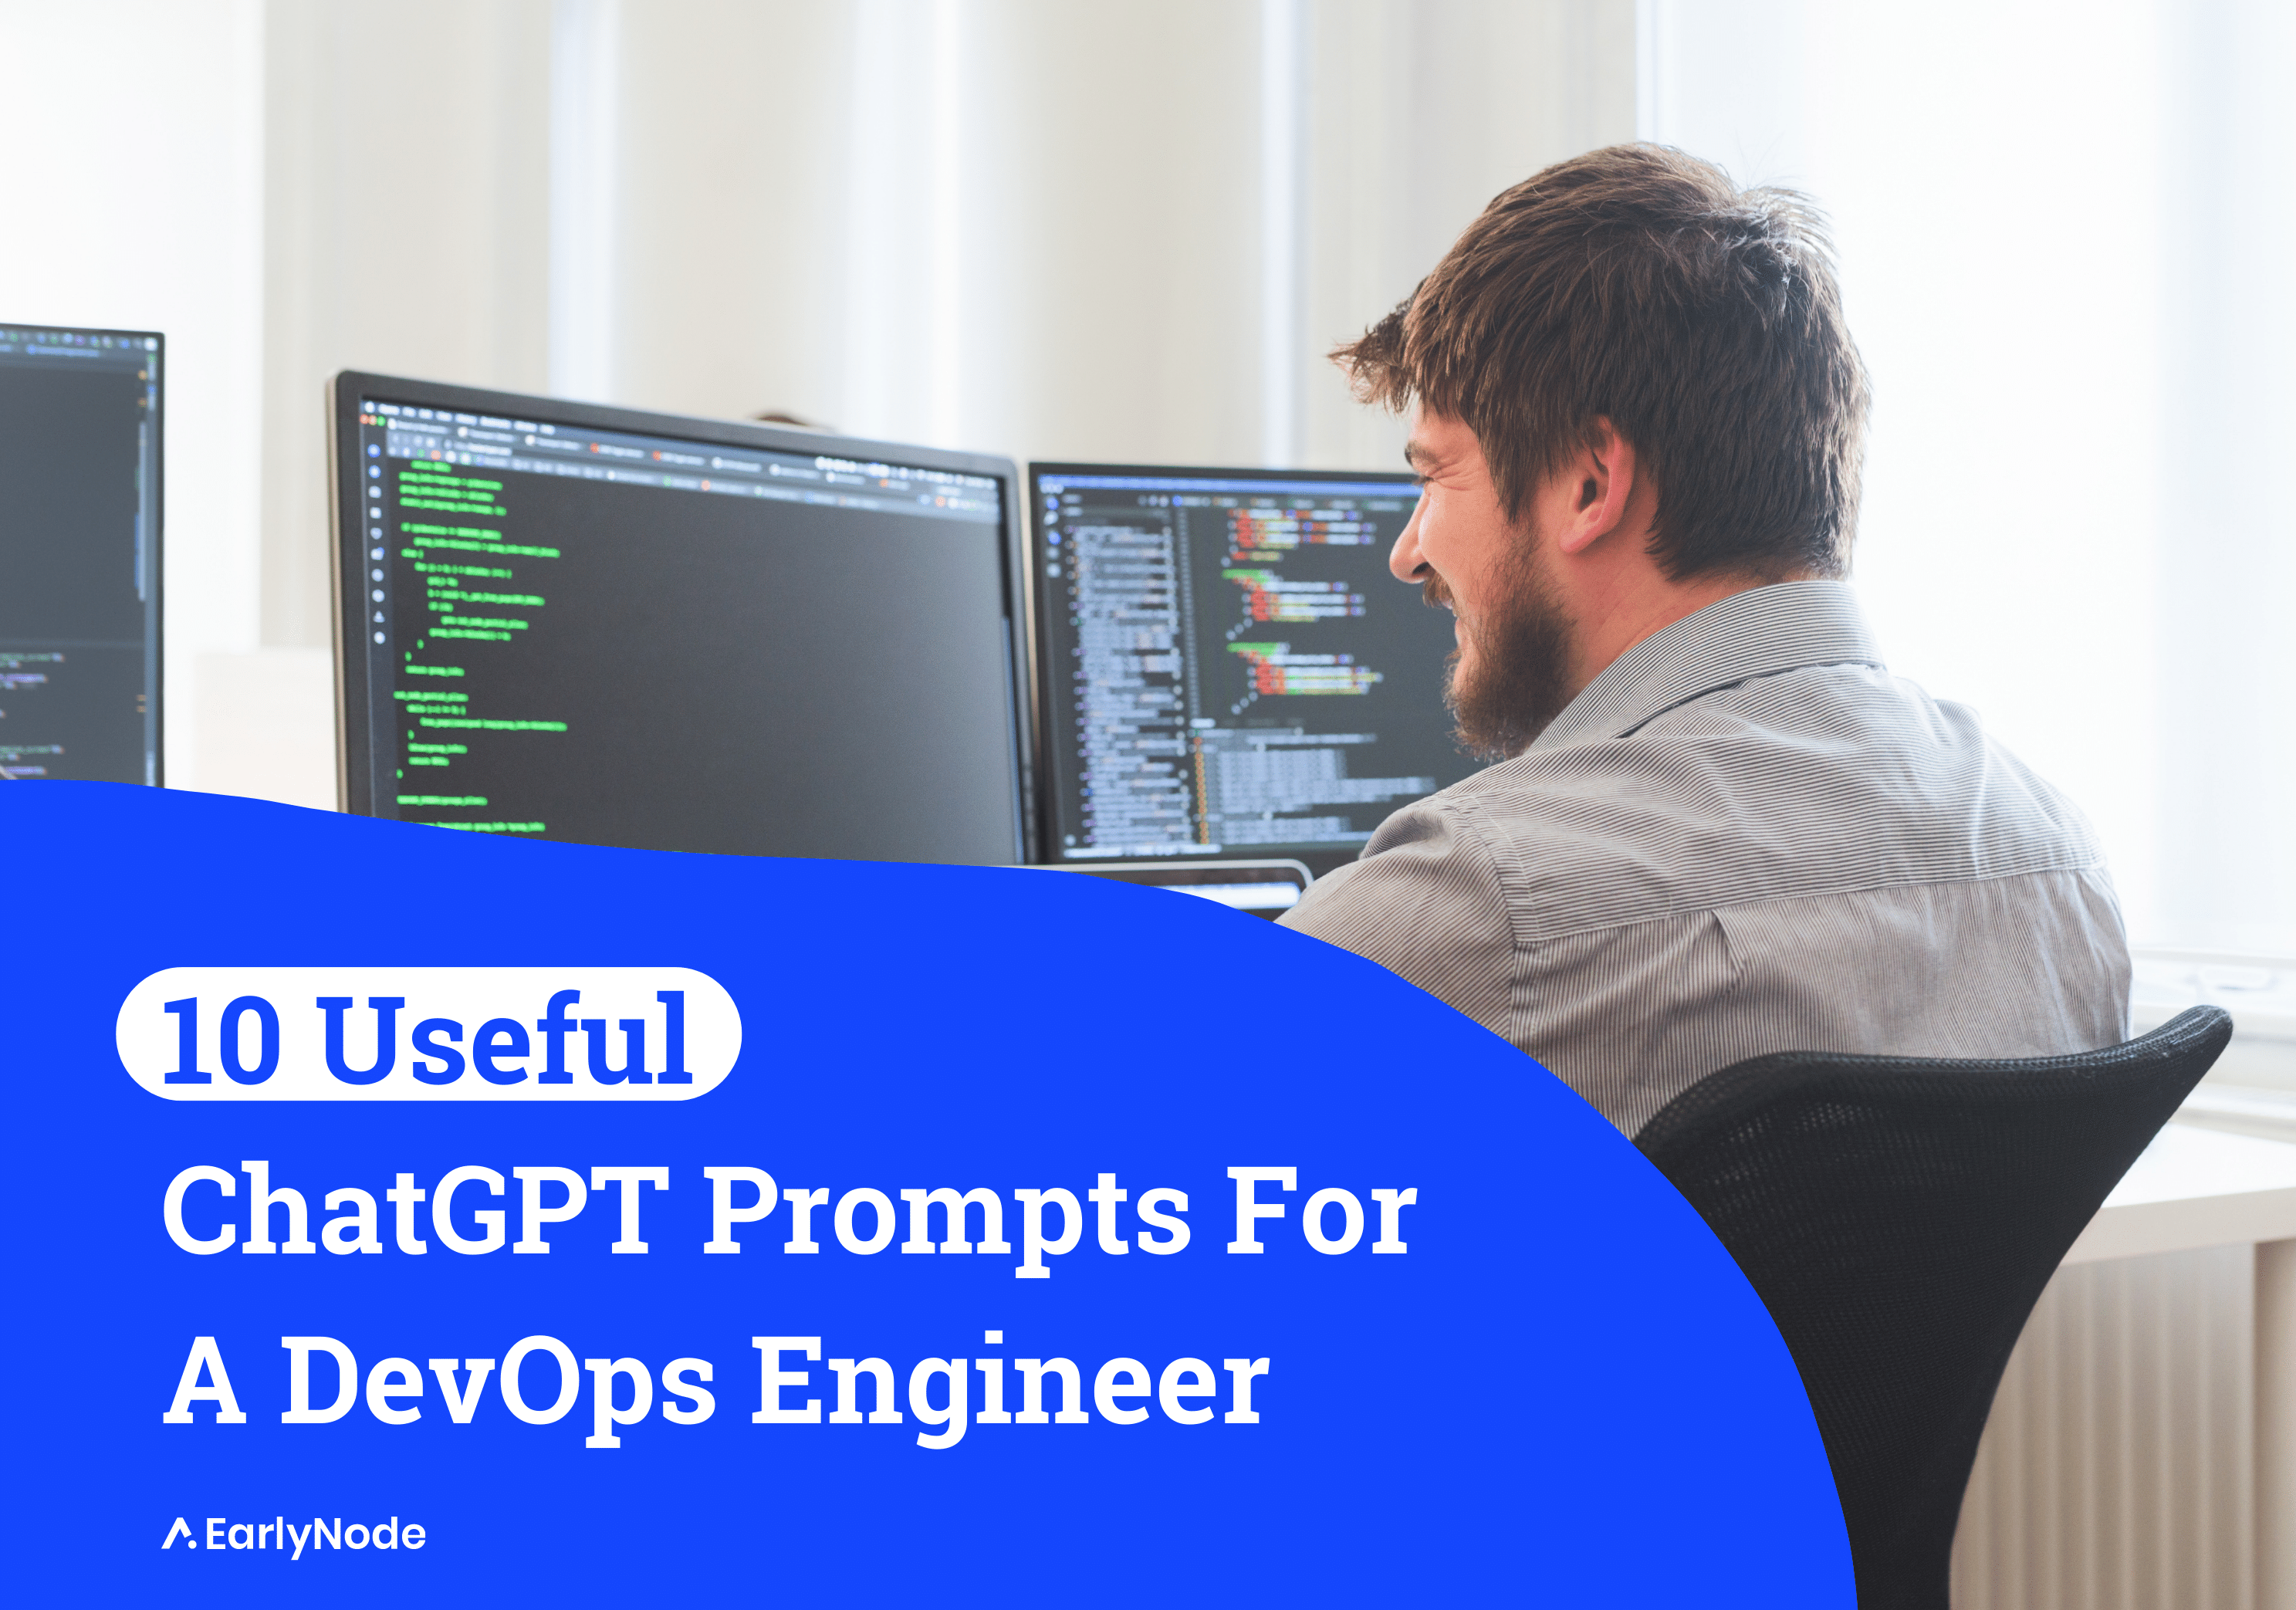 15 Technical ChatGPT Prompts For DevOps Engineers